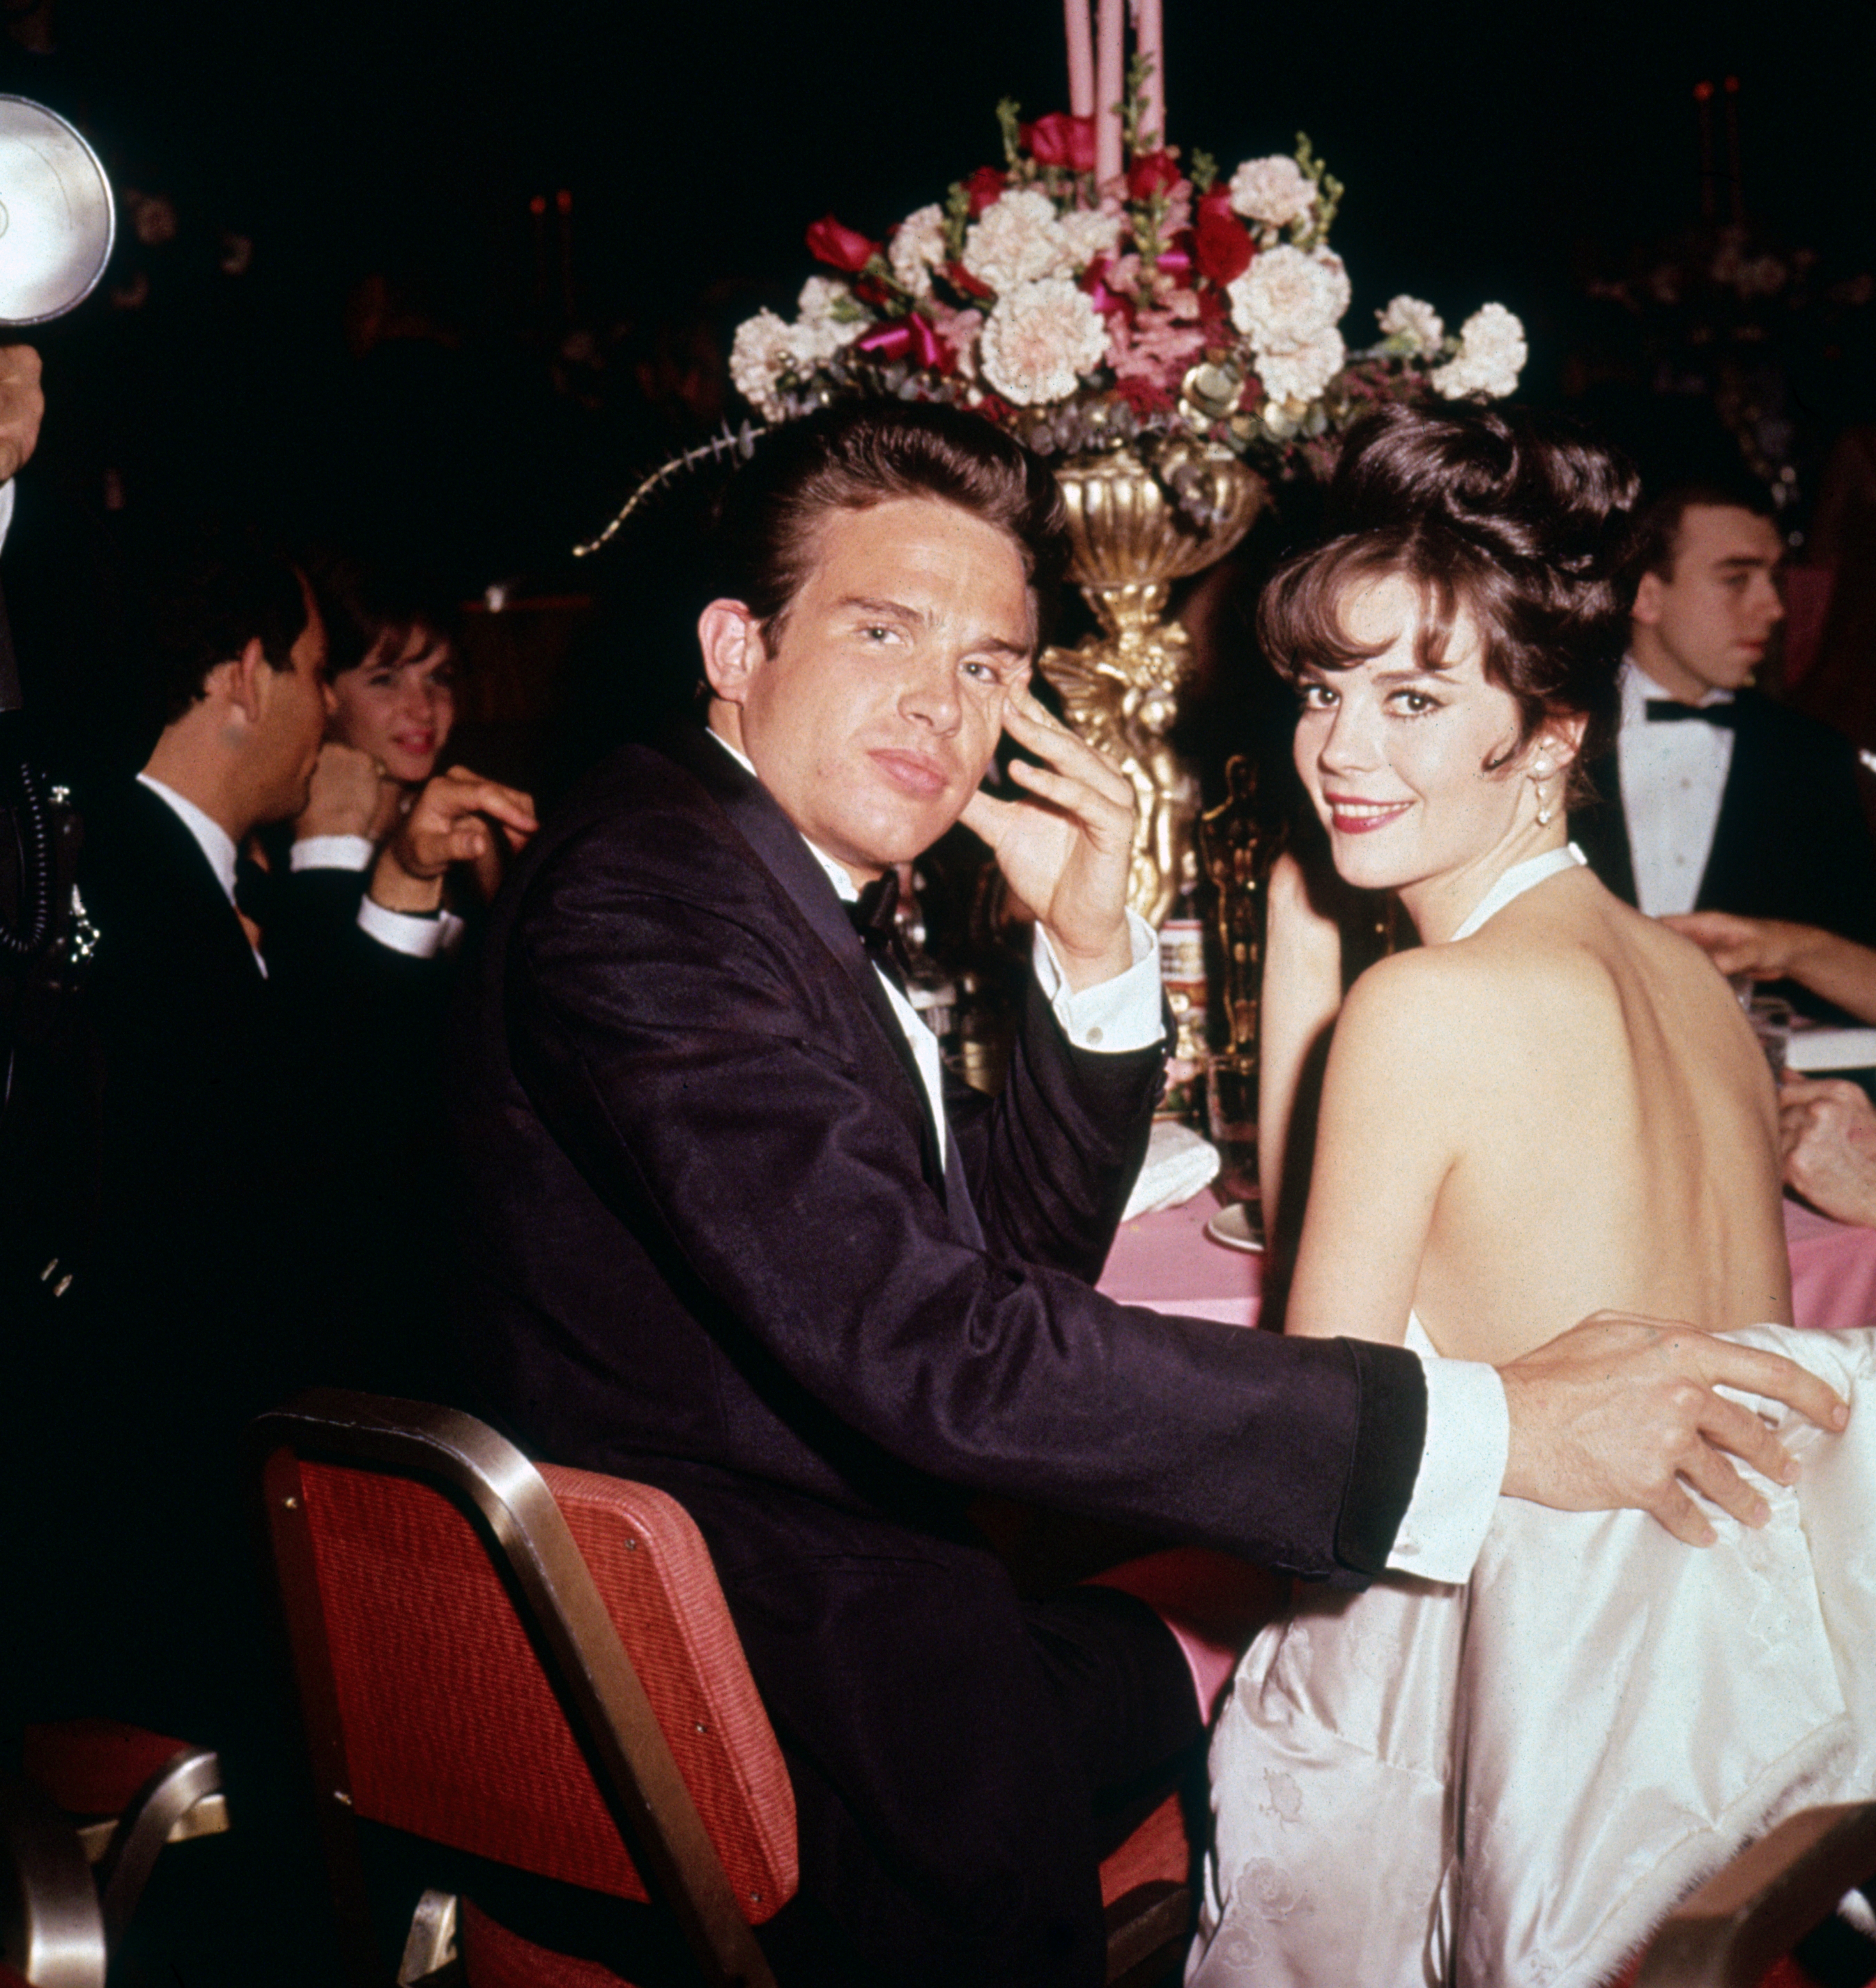 Warren Beatty and actress Natalie Wood pictured while seated together at a formal event on January 1, 1961 | Source: Getty Images